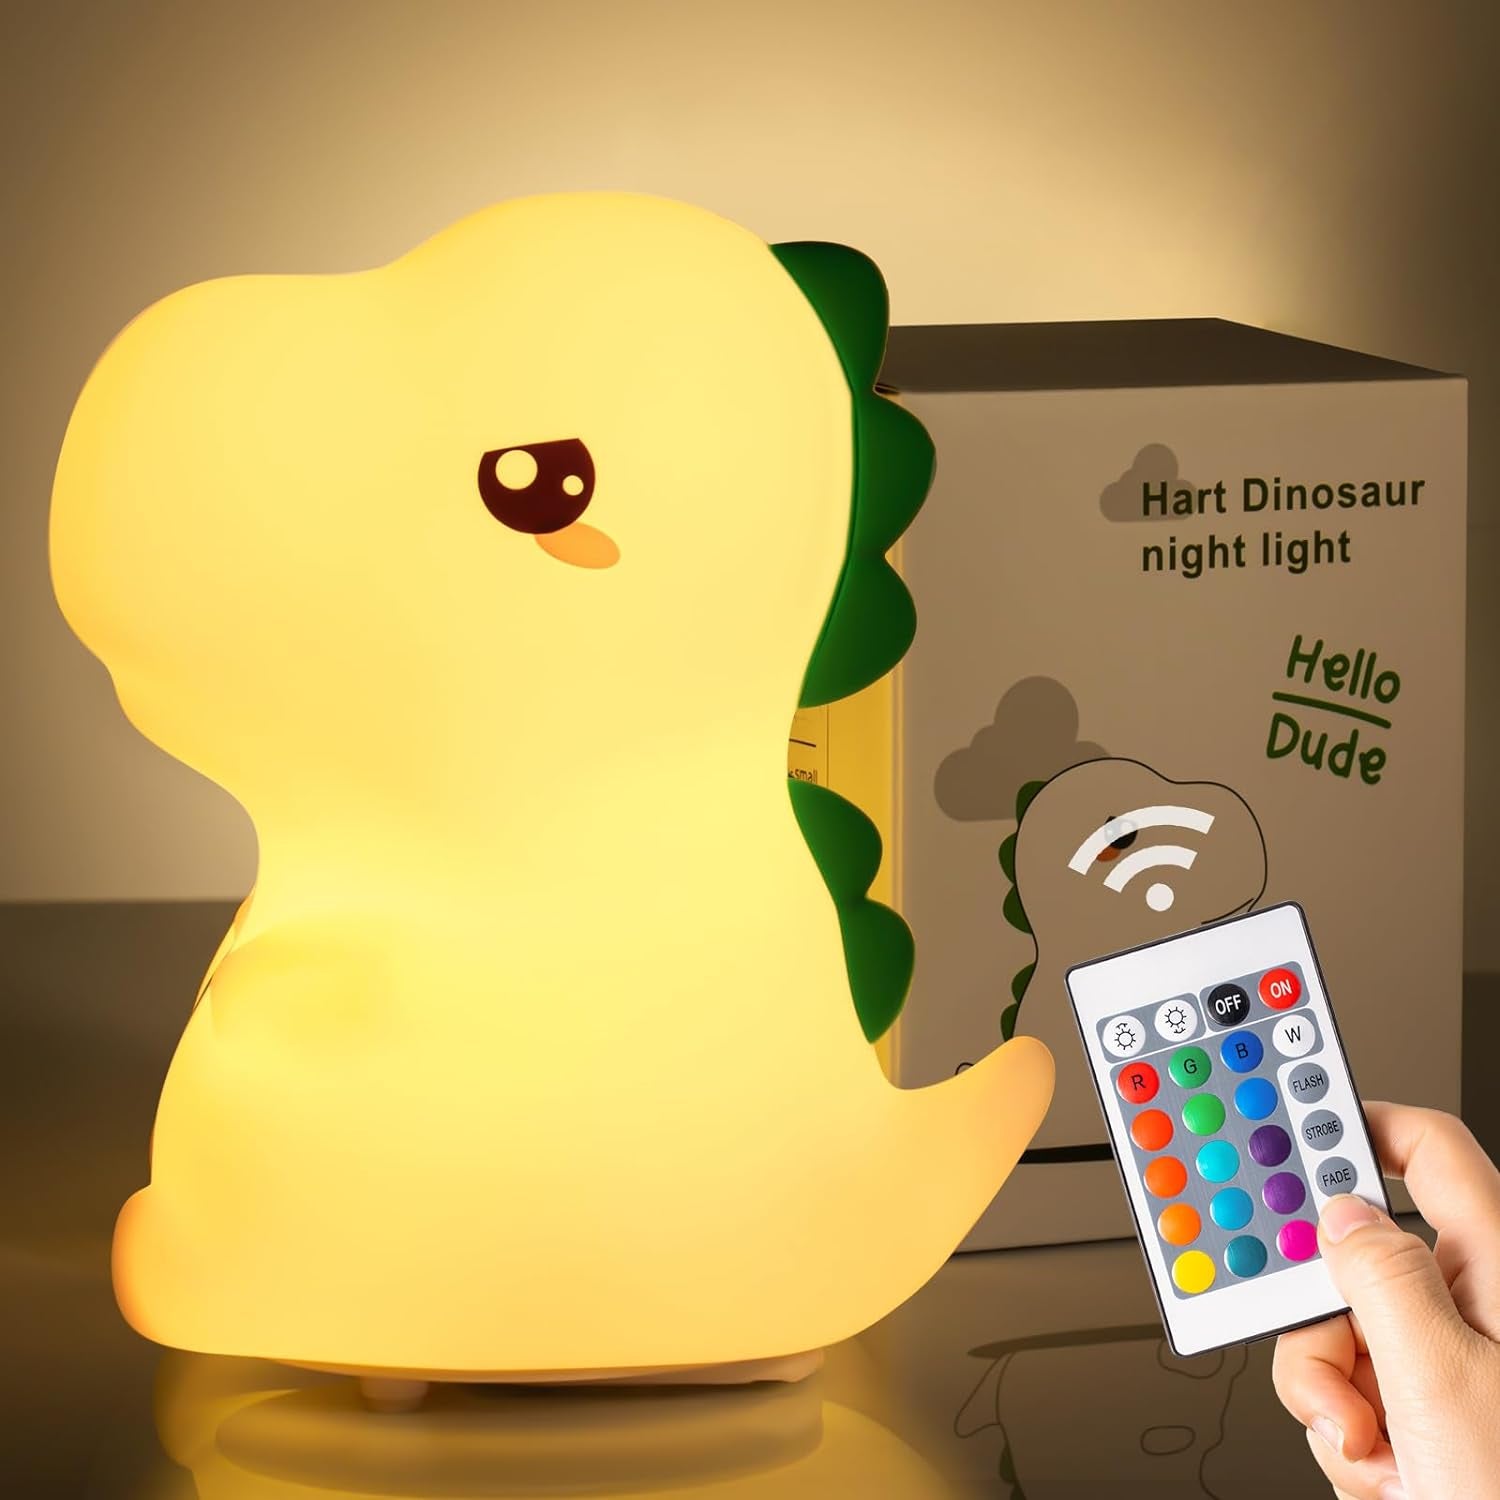 Dinosaur Cute Night Light Lamp, 16 Colors, USB Rechargeable, Silicone Material, Safe for Kids